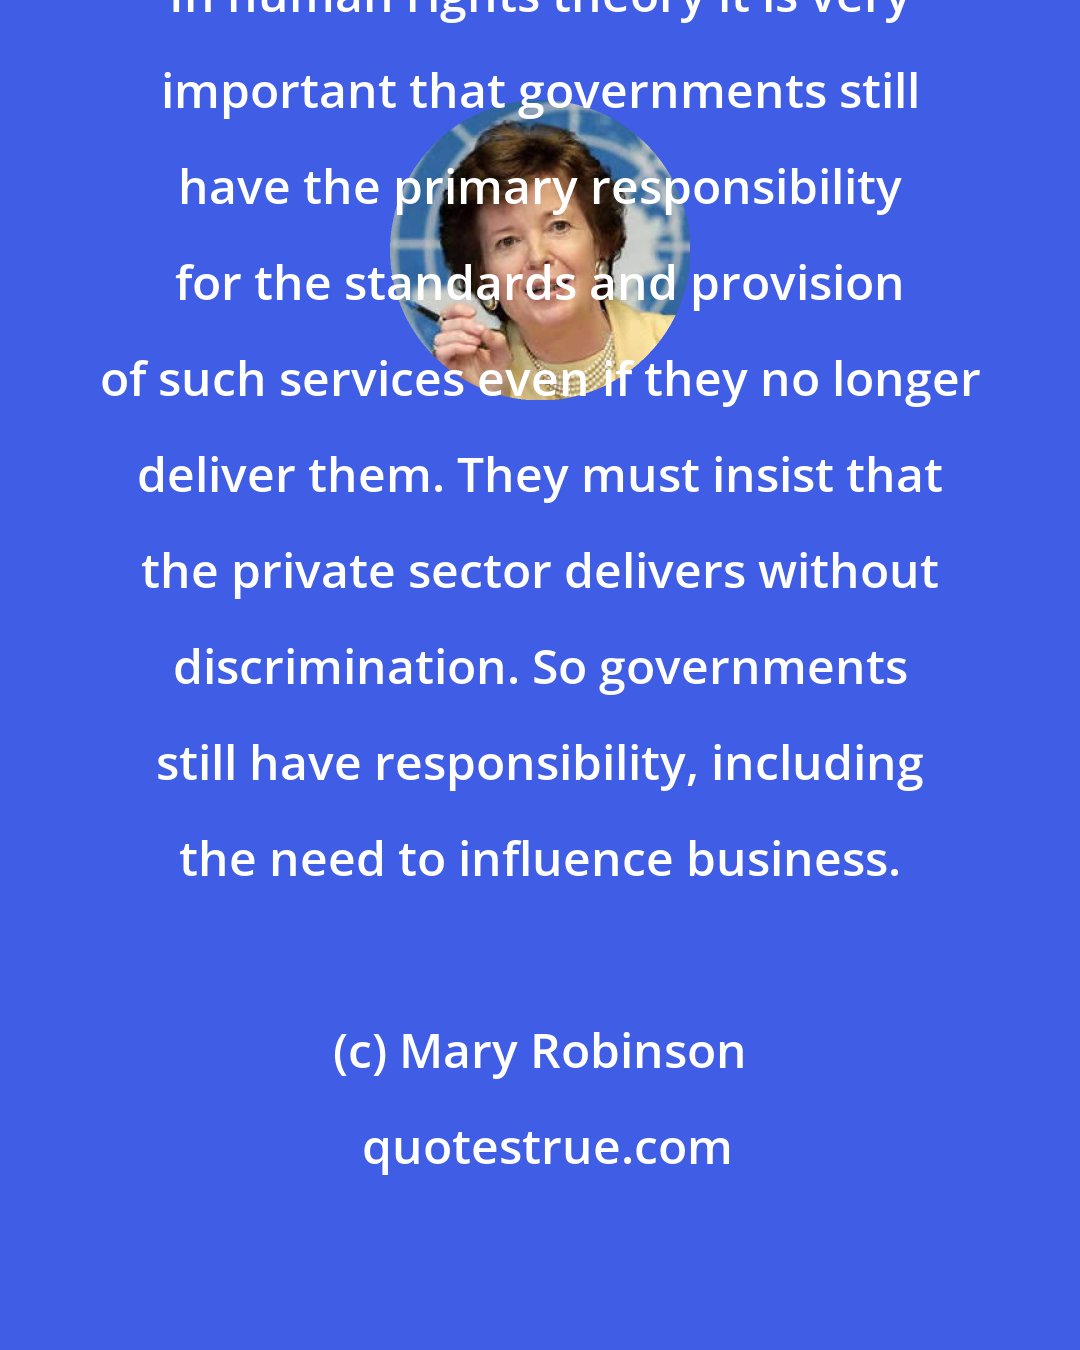 Mary Robinson: In human rights theory it is very important that governments still have the primary responsibility for the standards and provision of such services even if they no longer deliver them. They must insist that the private sector delivers without discrimination. So governments still have responsibility, including the need to influence business.